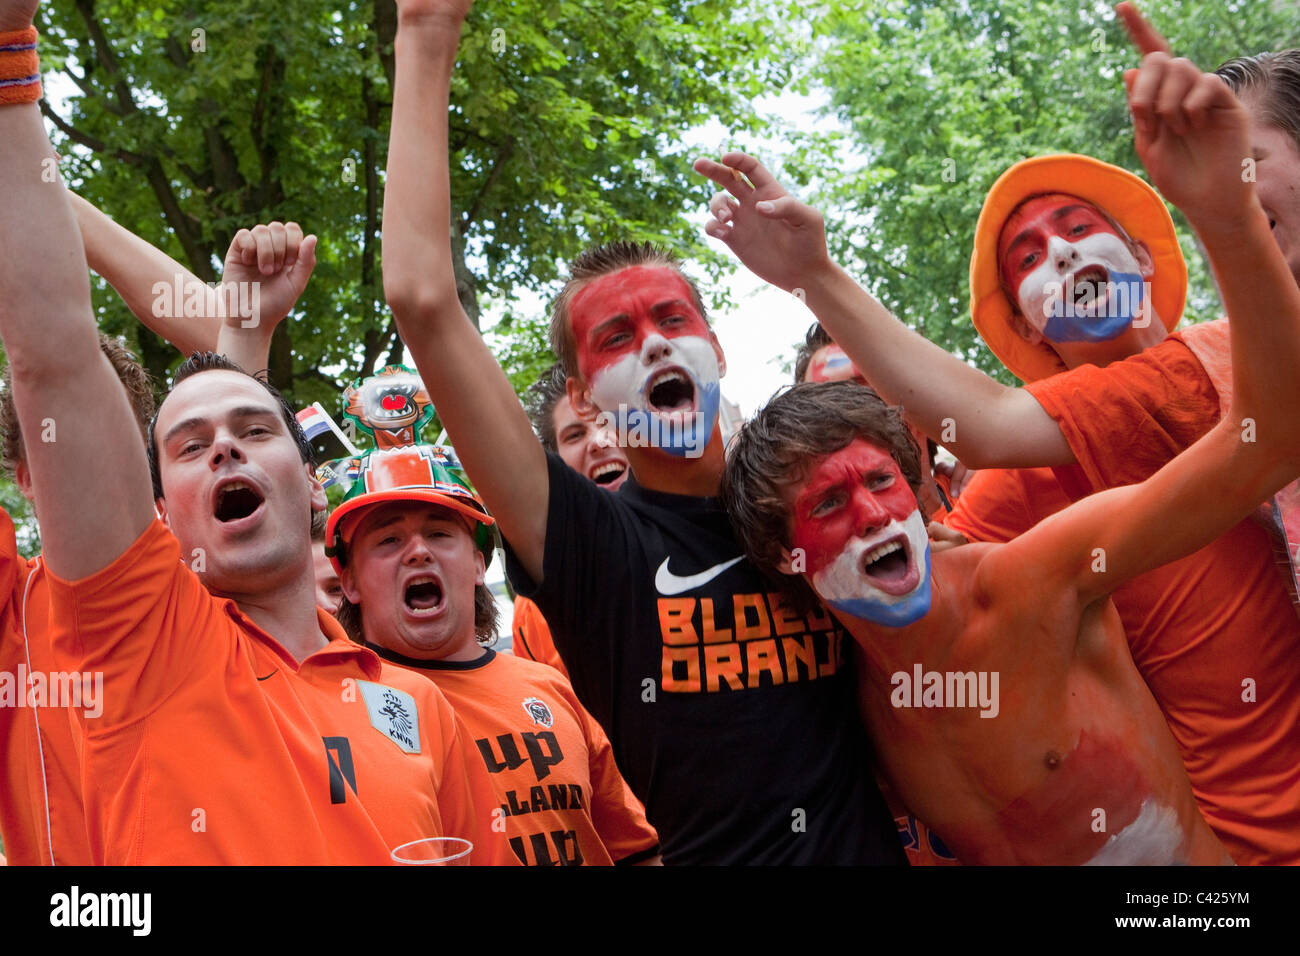 The Netherlands, Amsterdam, World Cup Football 13 July 2010. Inauguration party of Dutch national team. Supporters. Stock Photo